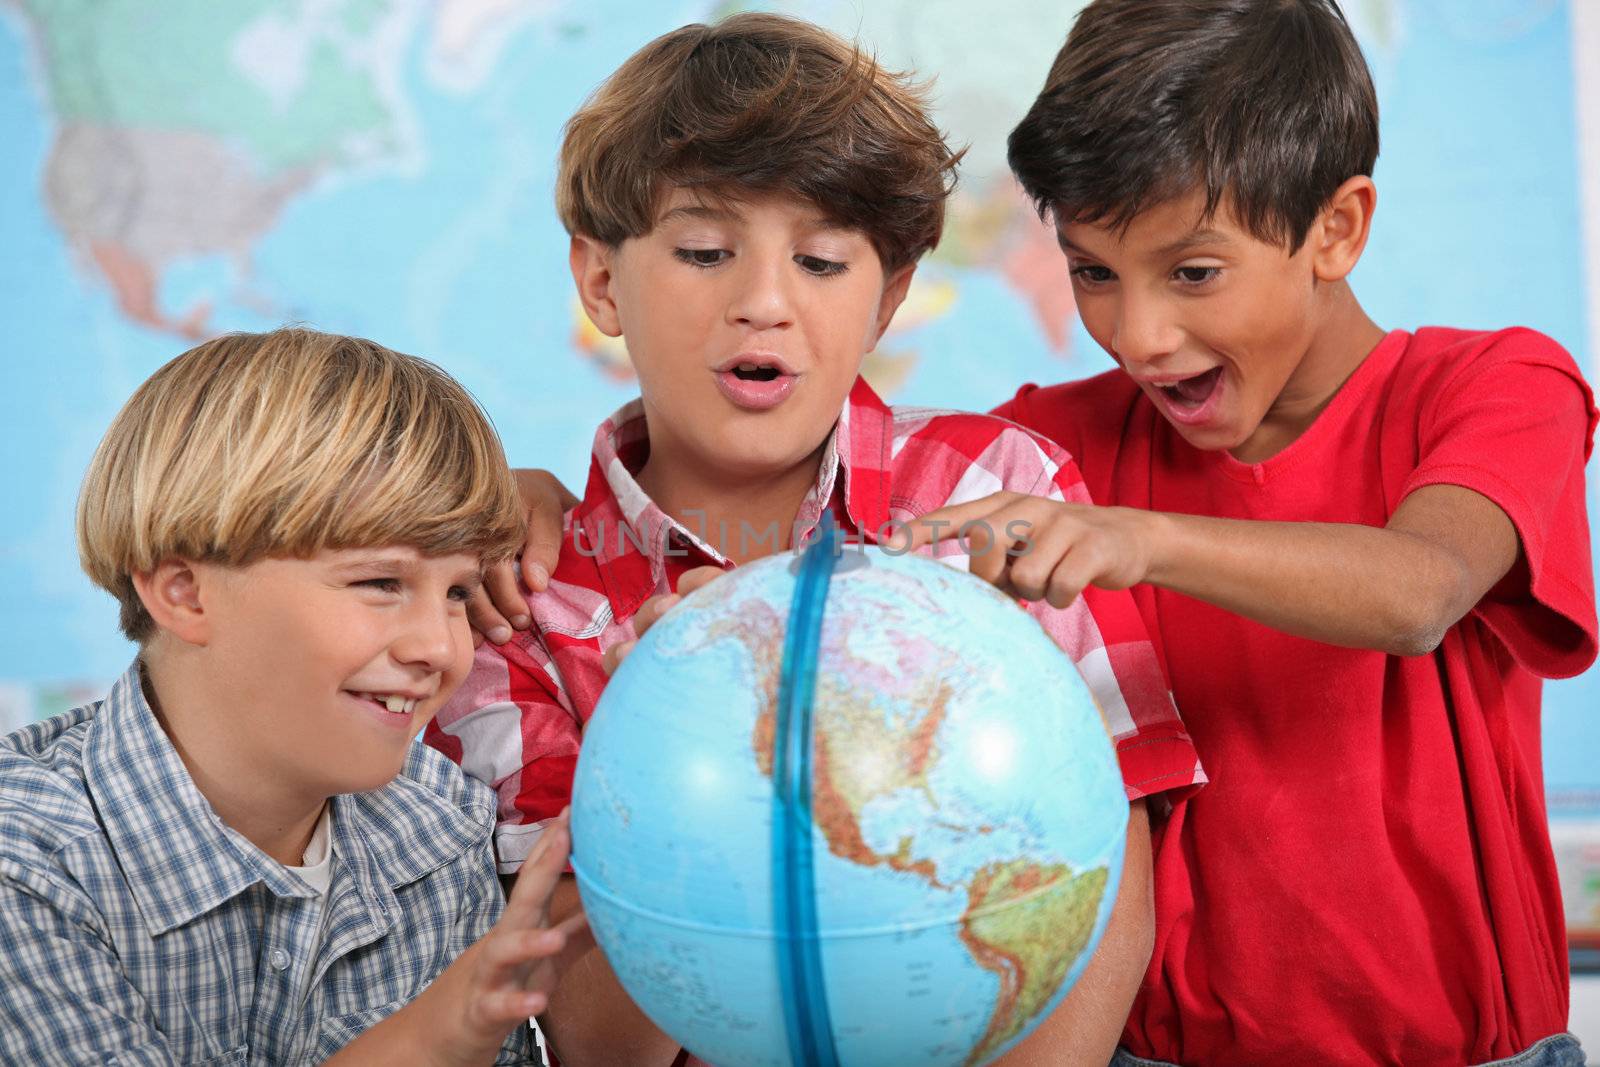 Children looking at a globe by phovoir